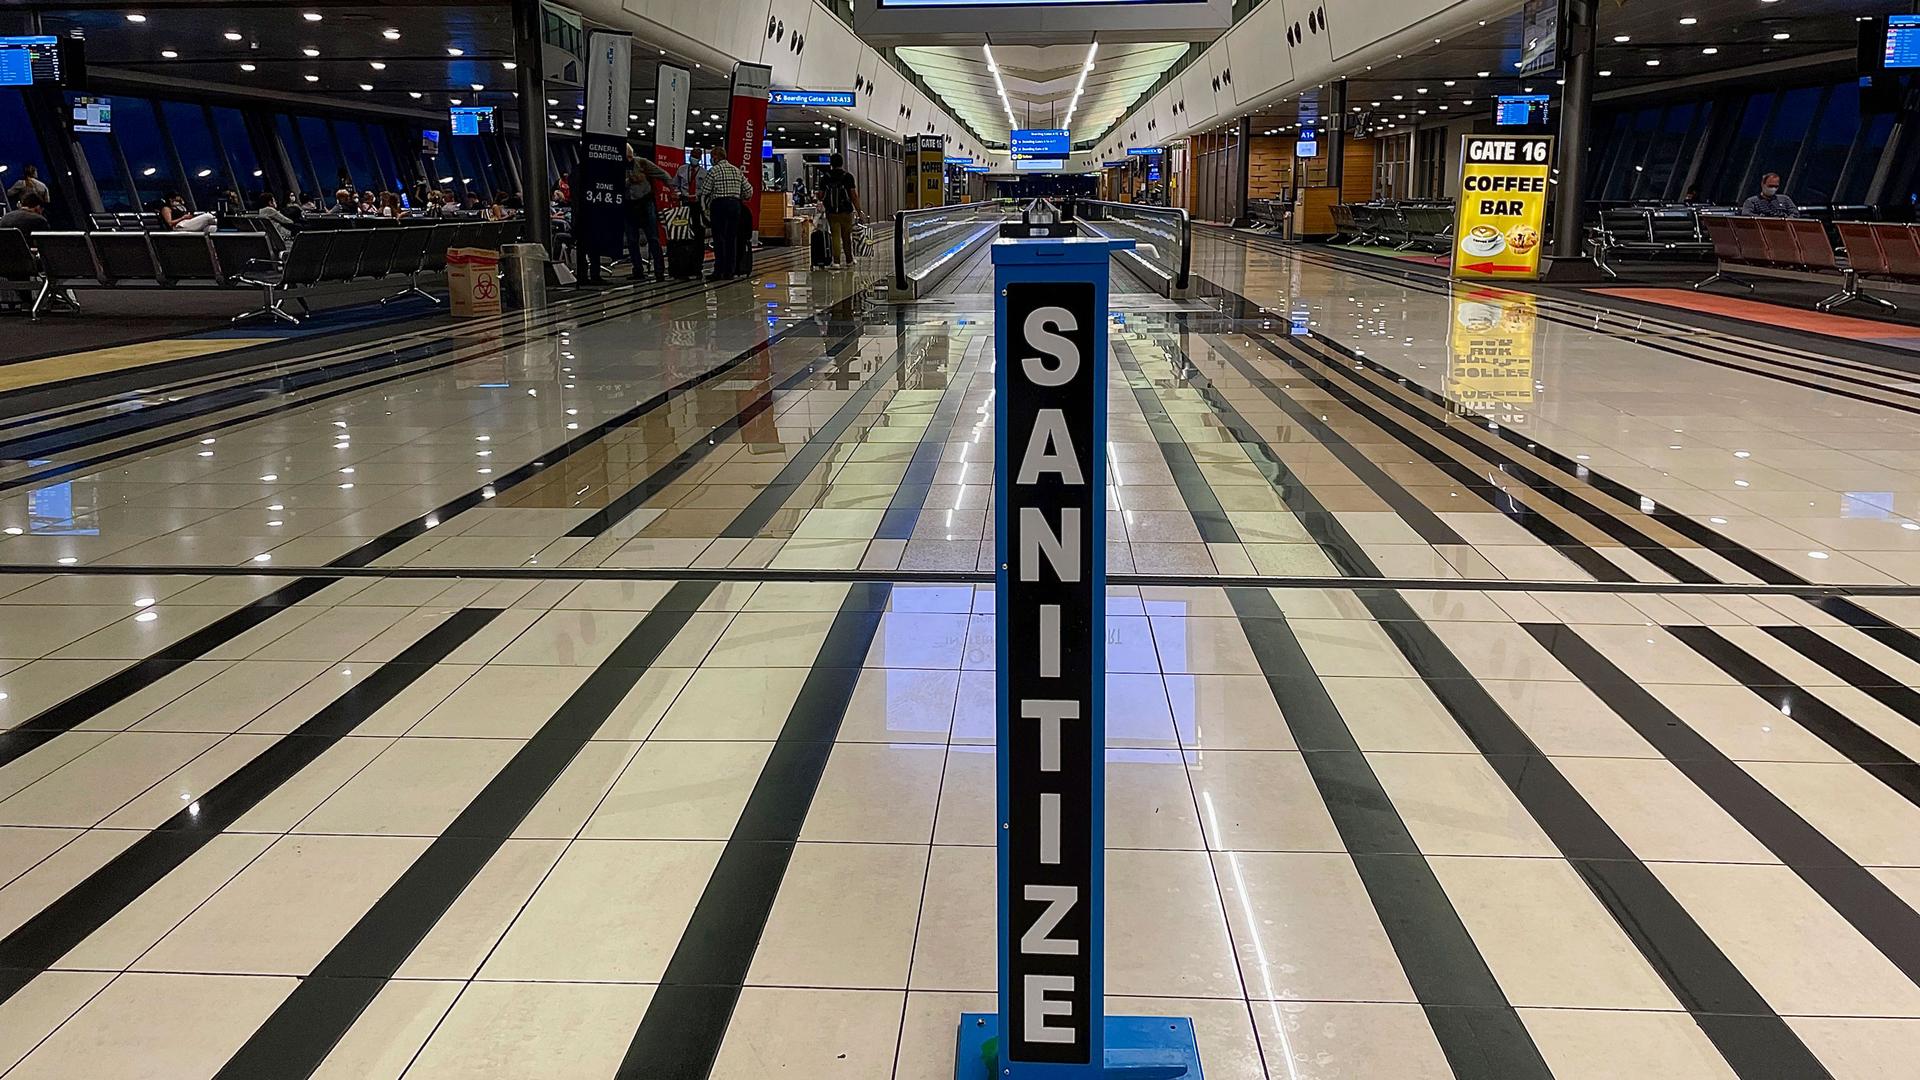 An airport terminal is shown nearly empty with black stripes along the flooring and a large hand sanitizing station in the center of the photogragh.